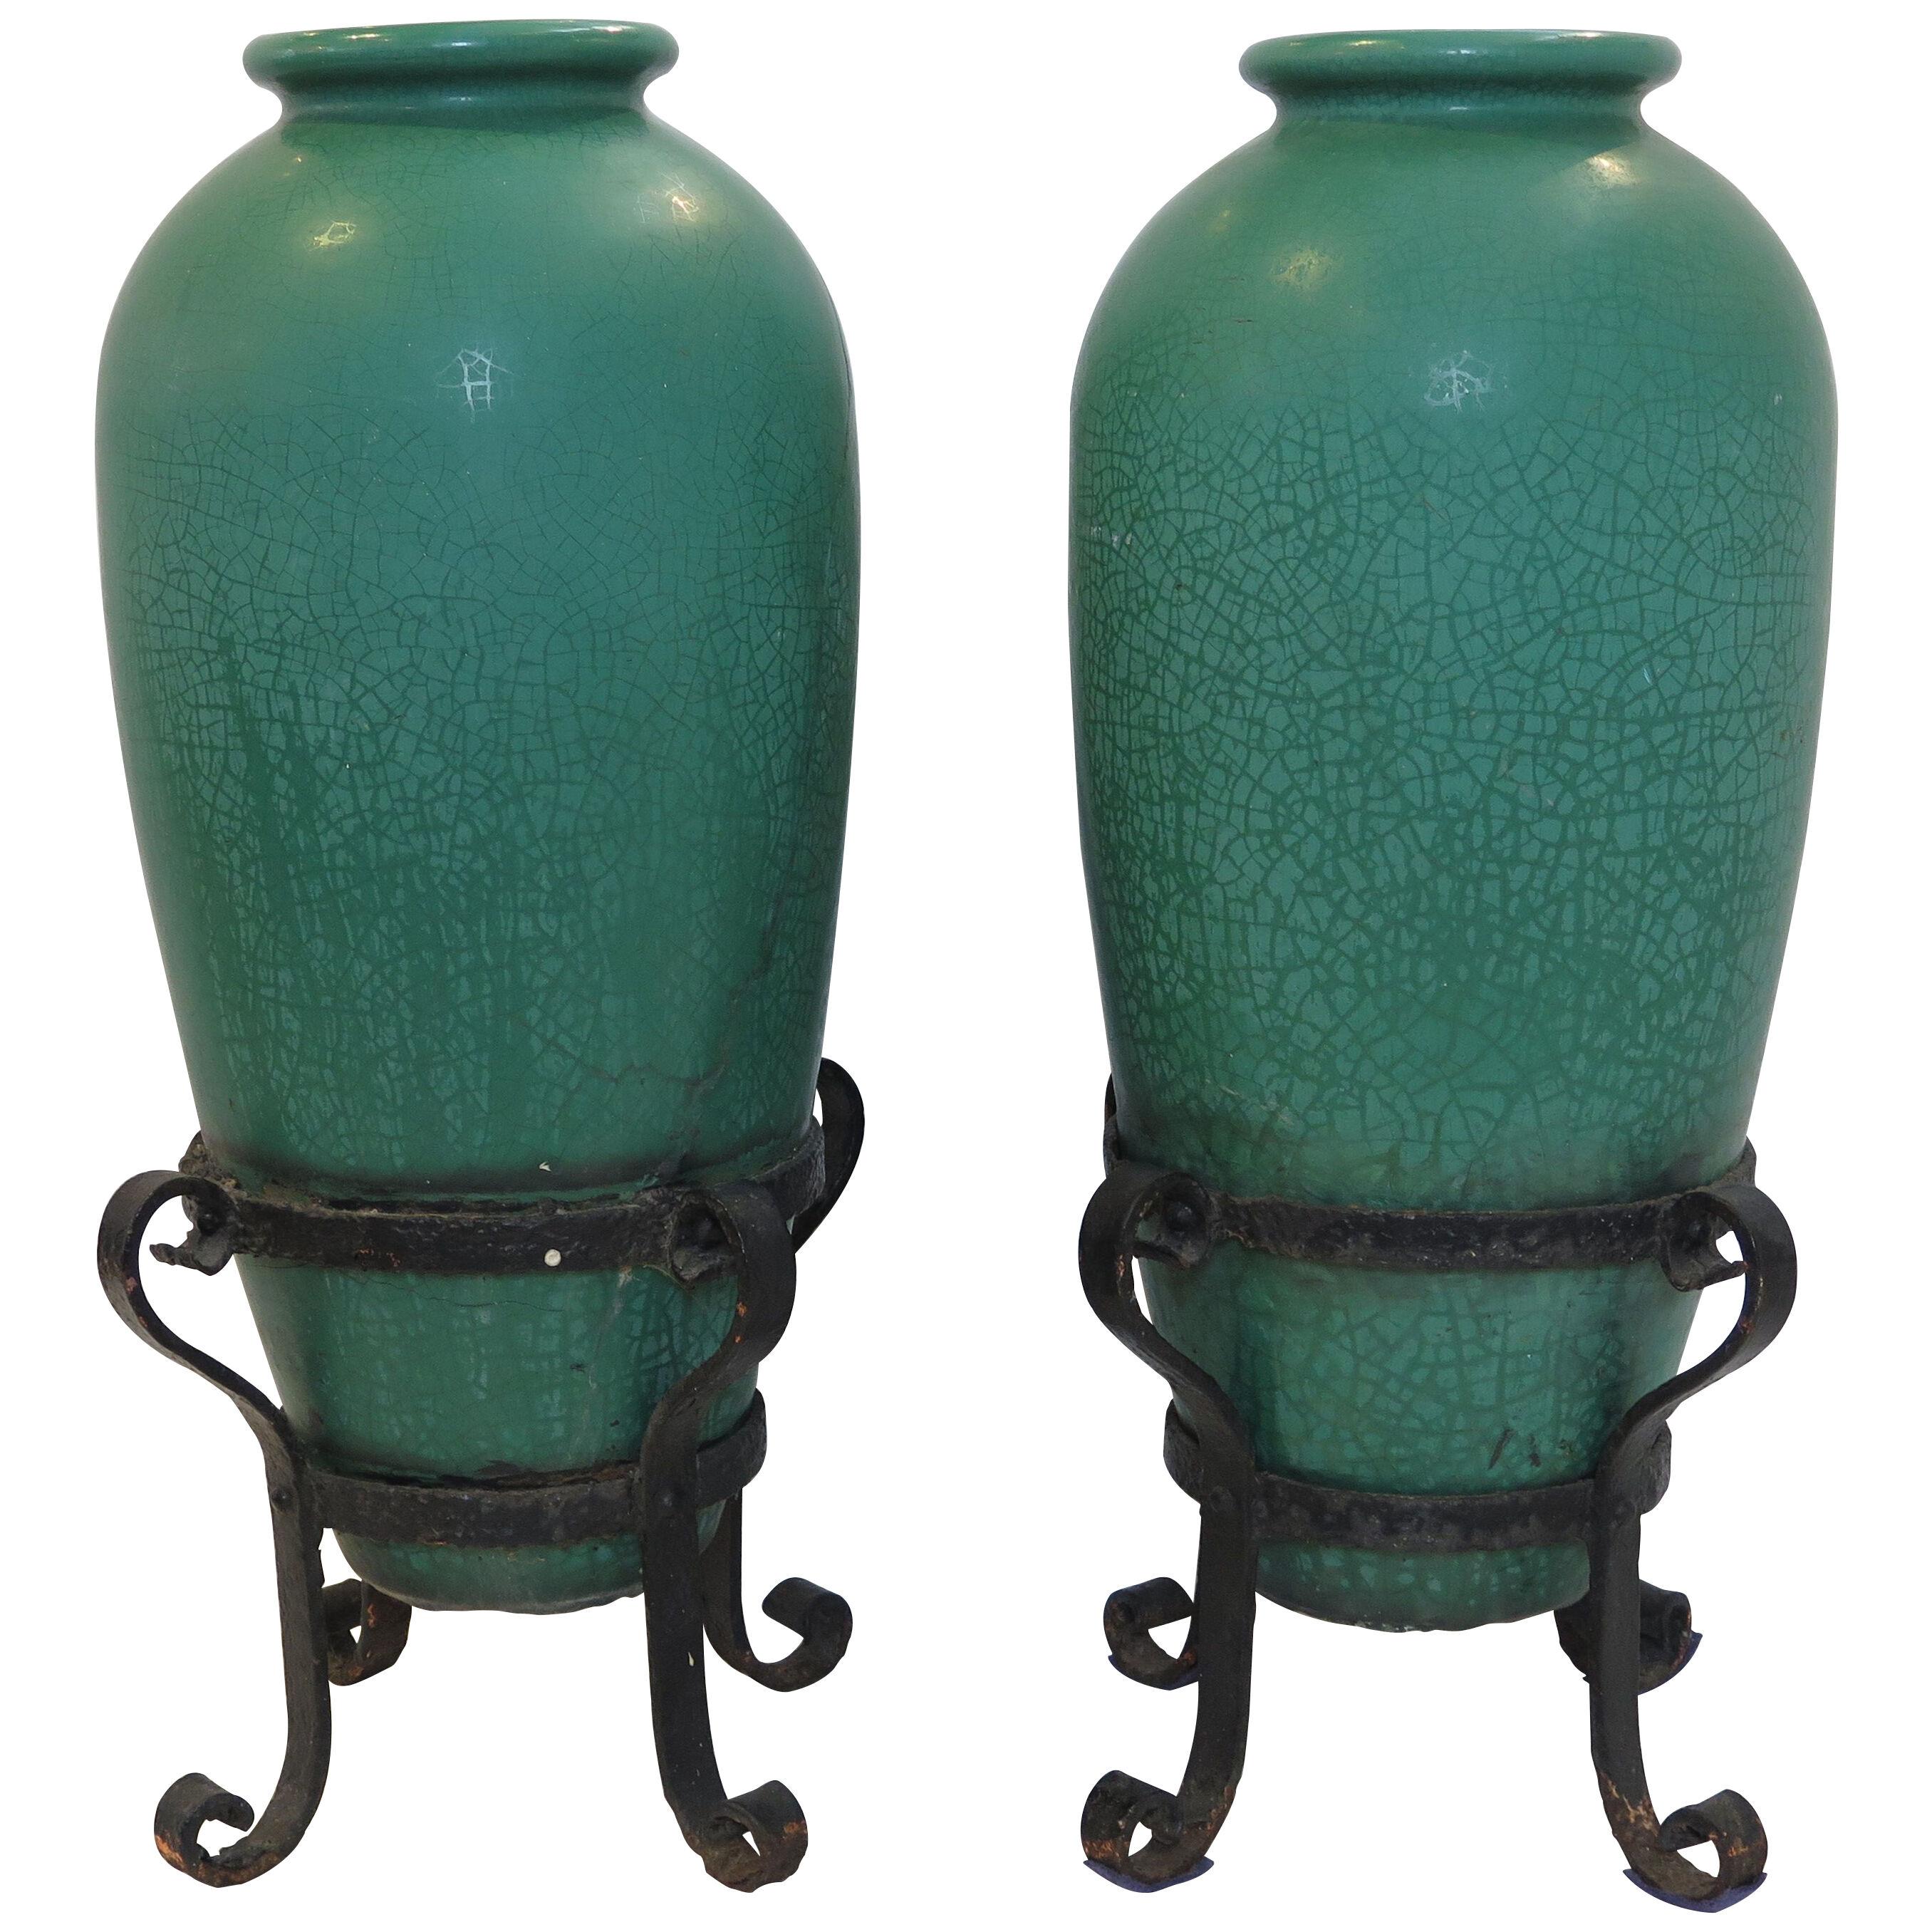 A Pair of Galloway Pottery Crackled Glaze Urns with Iron Stands